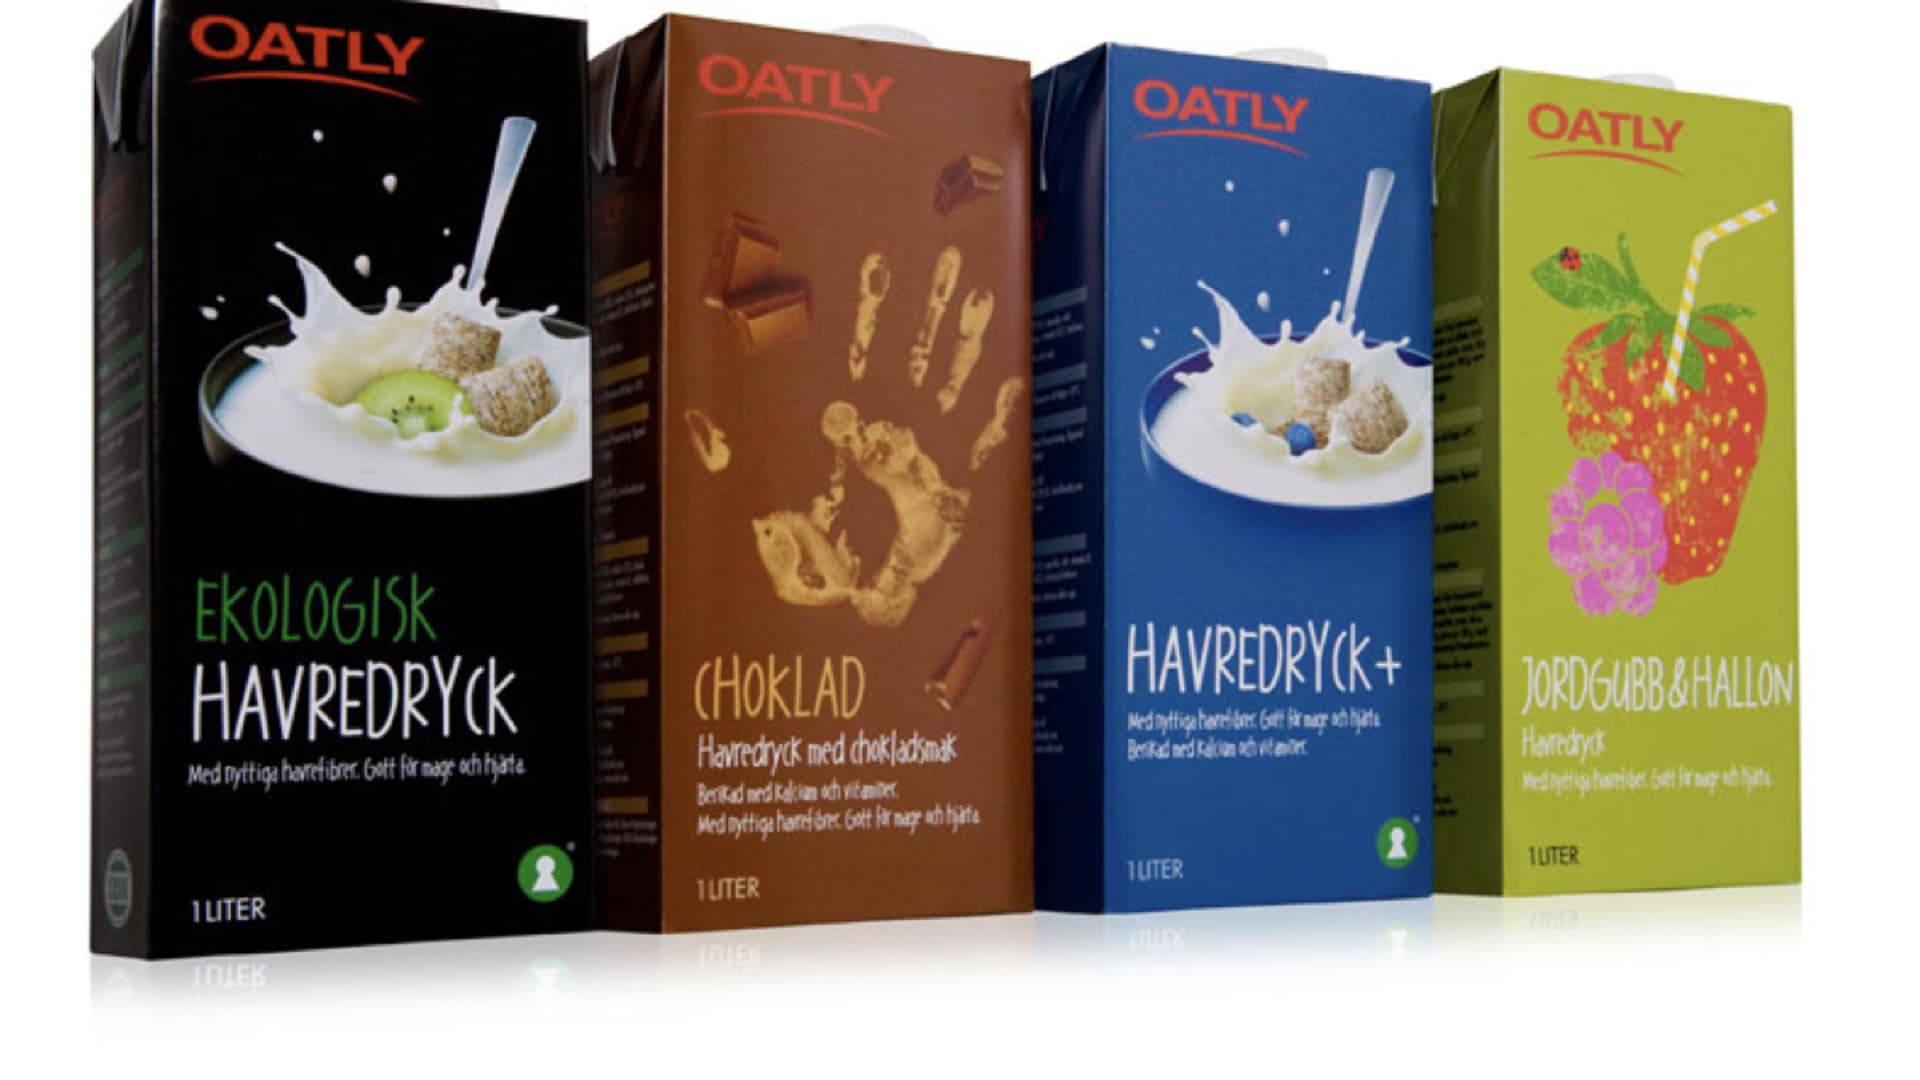 Oatly packaging before the rebrand.